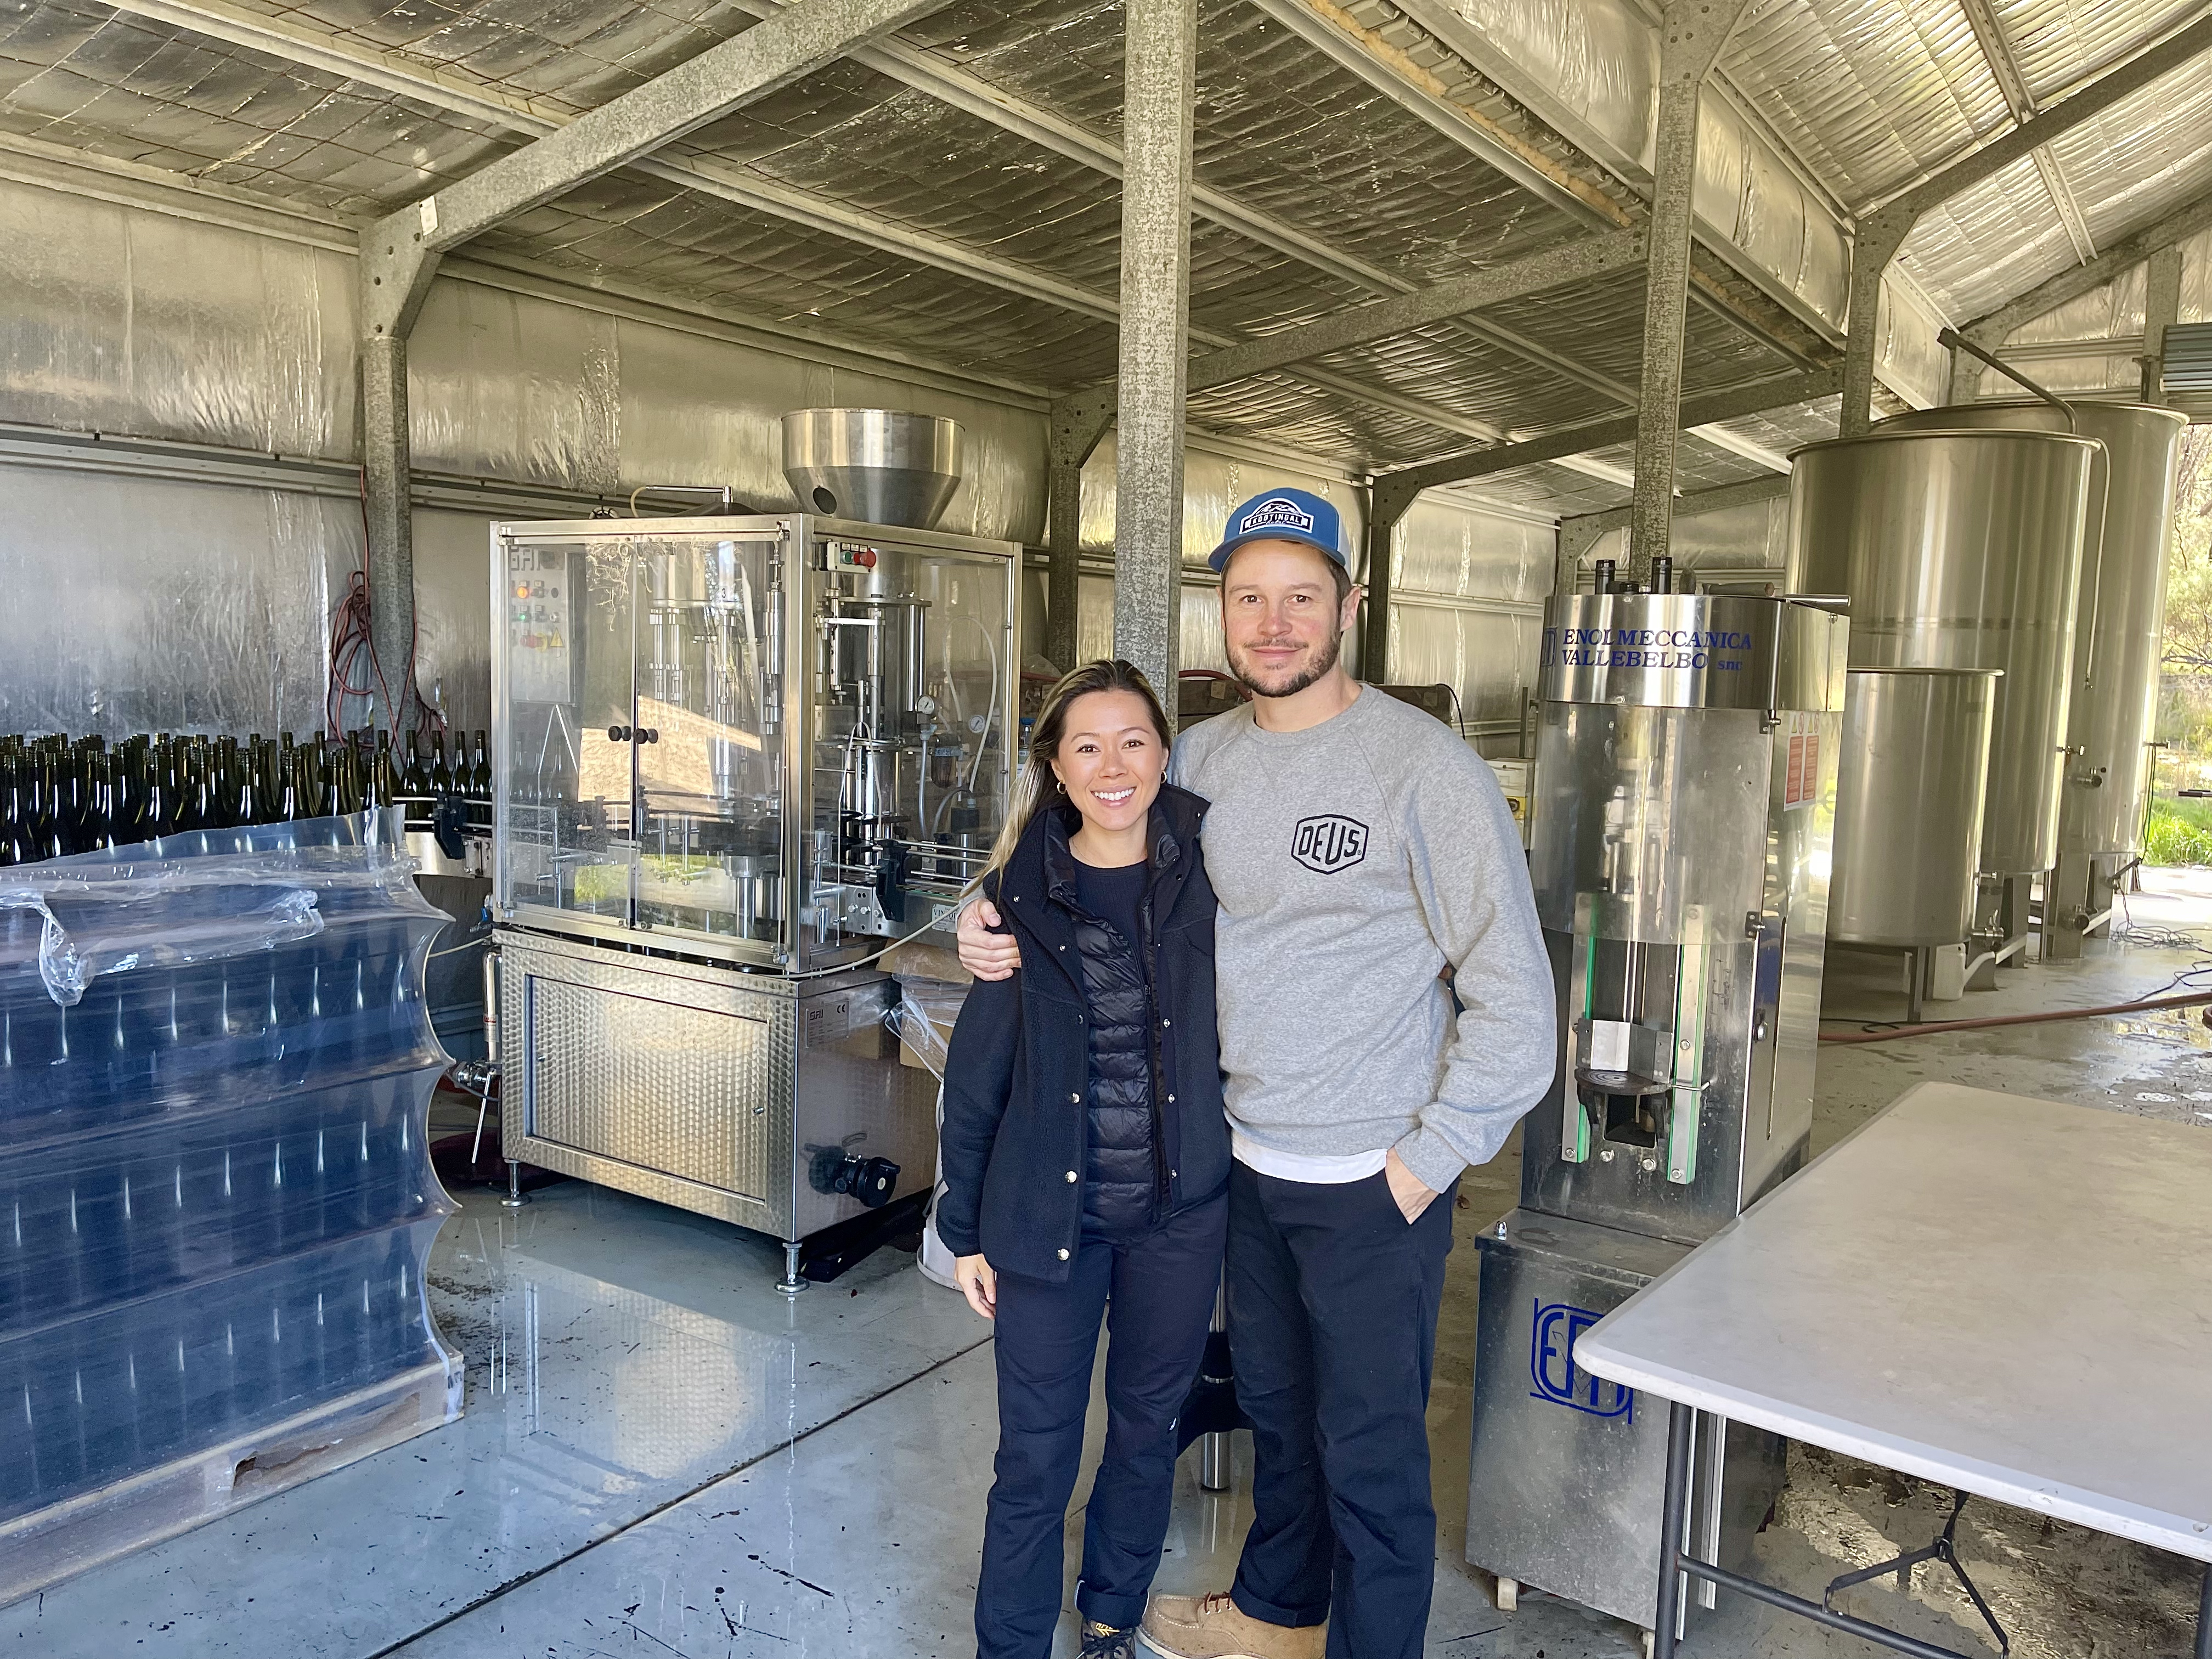 Man and woman posing in winery